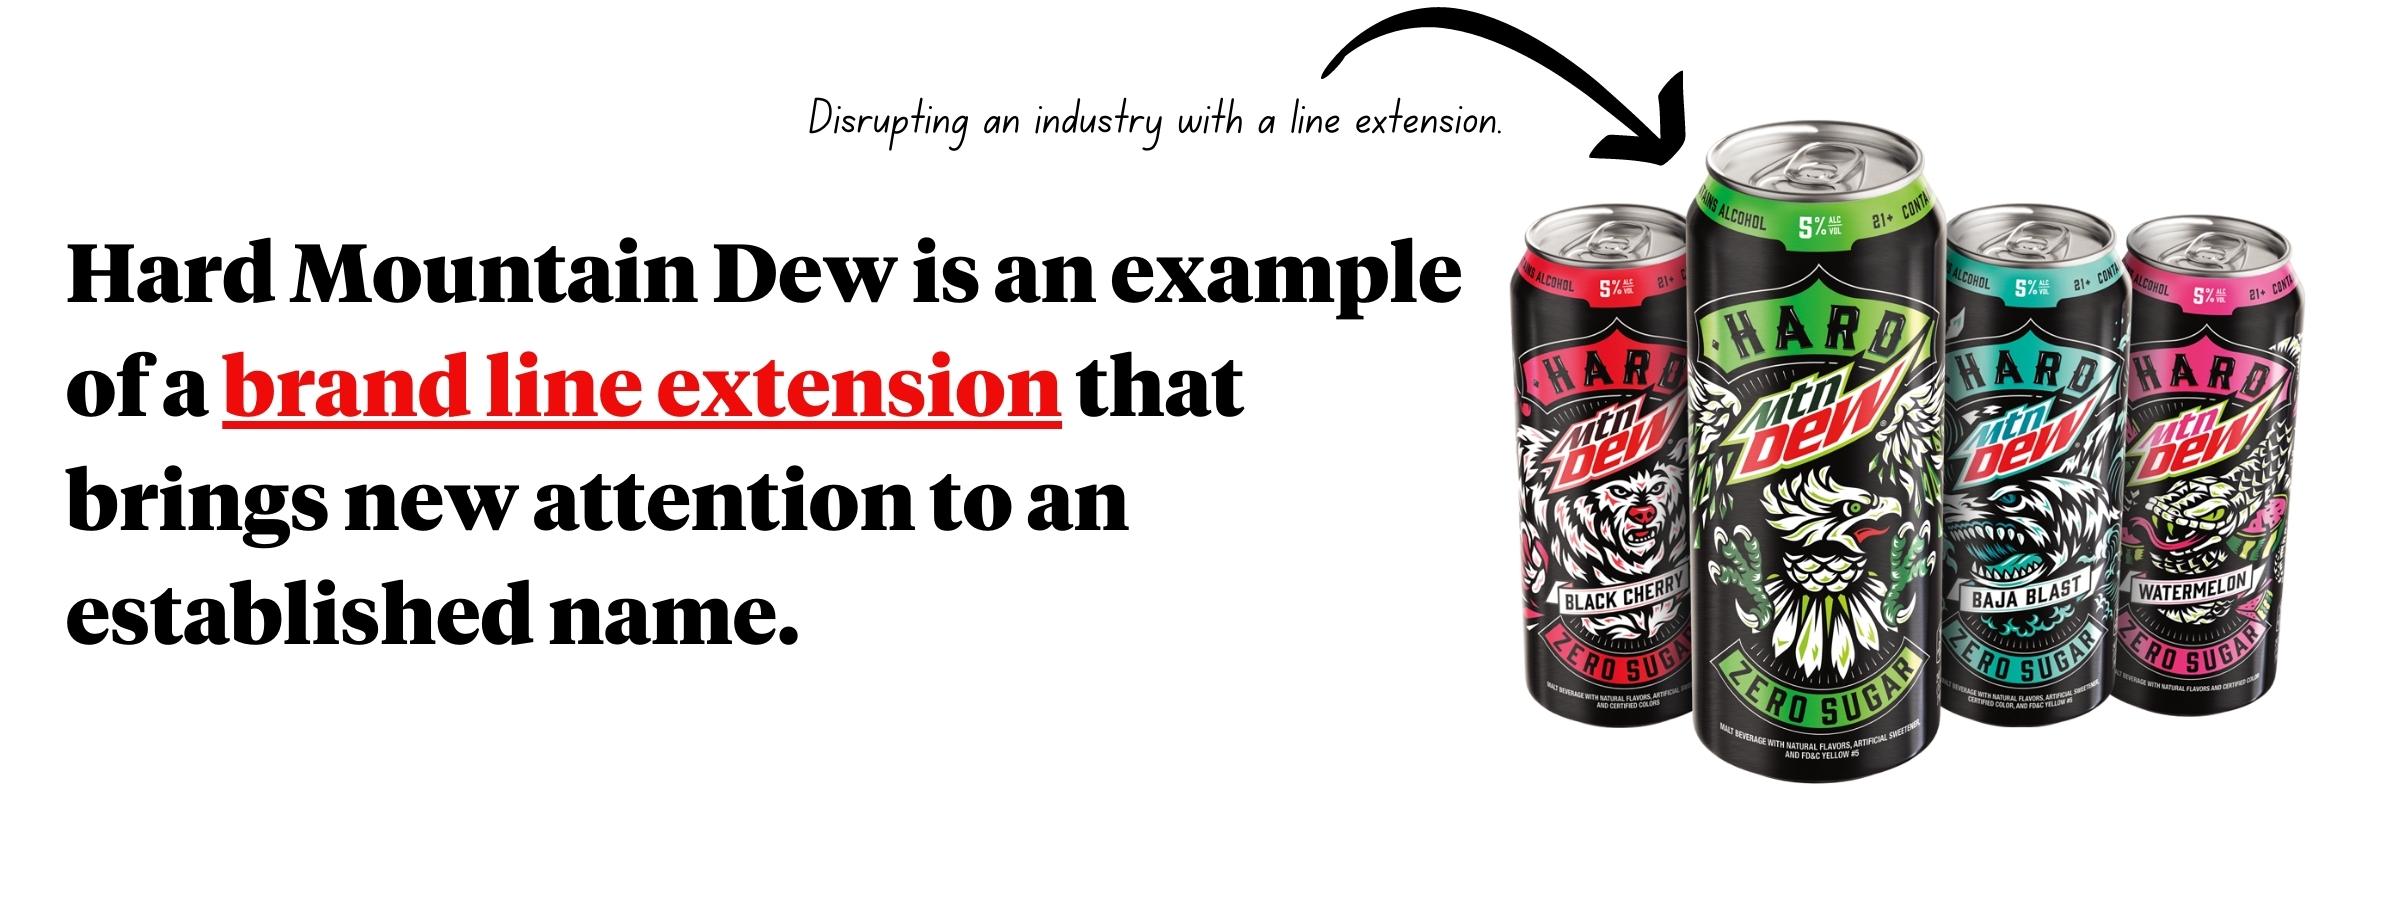 Hard Mountain Dew Line Extension